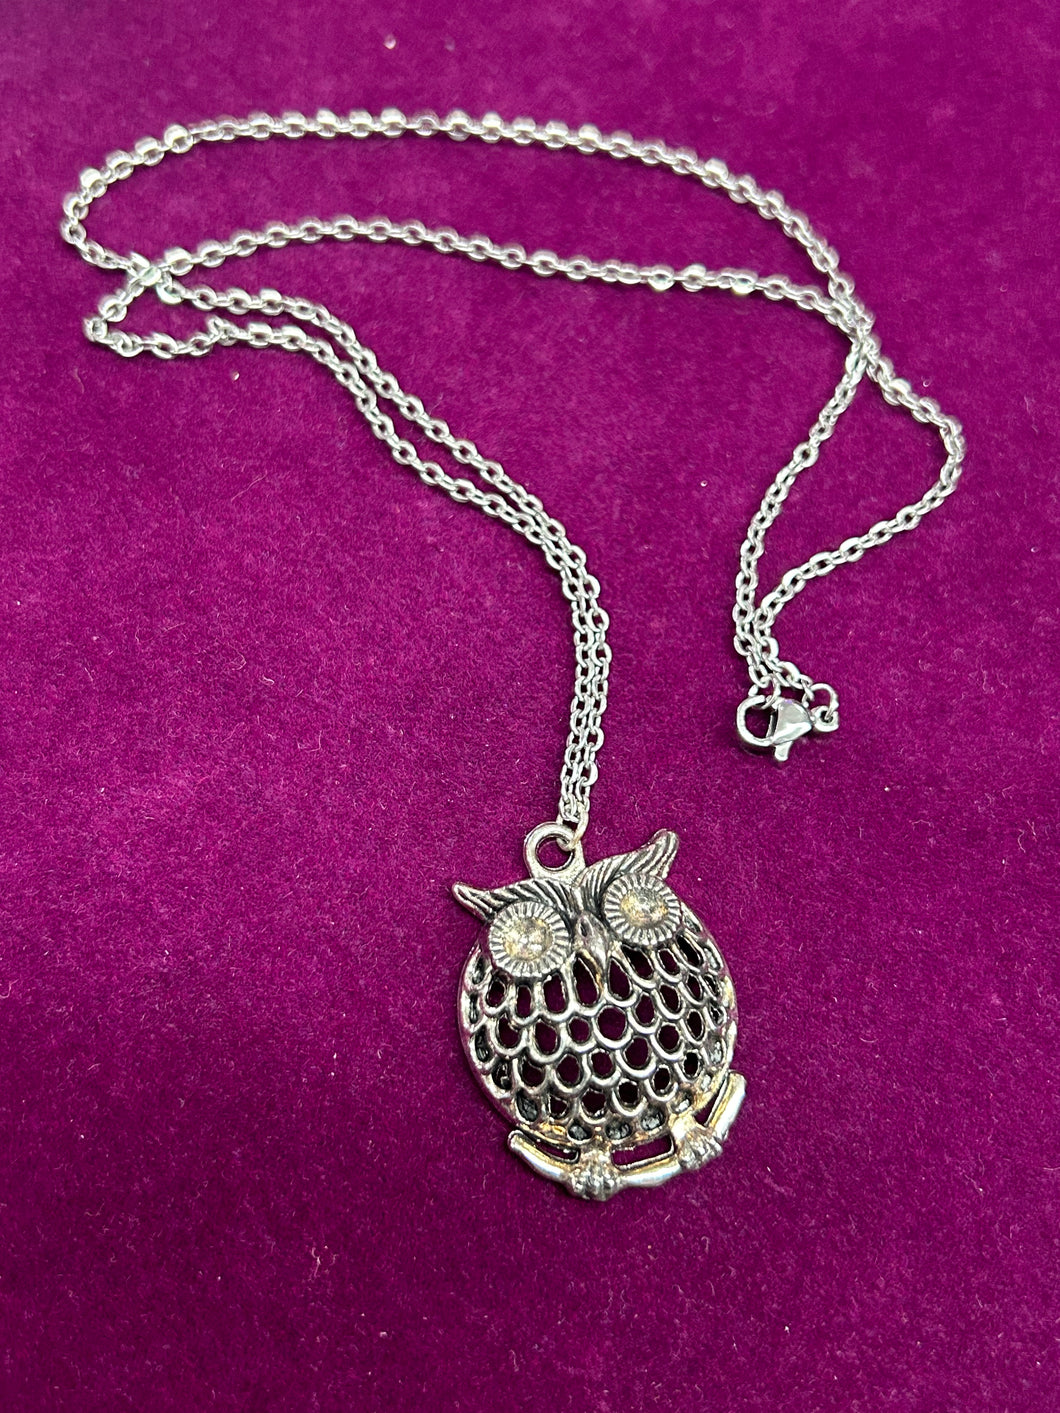 OWL SILVER NECKLACE